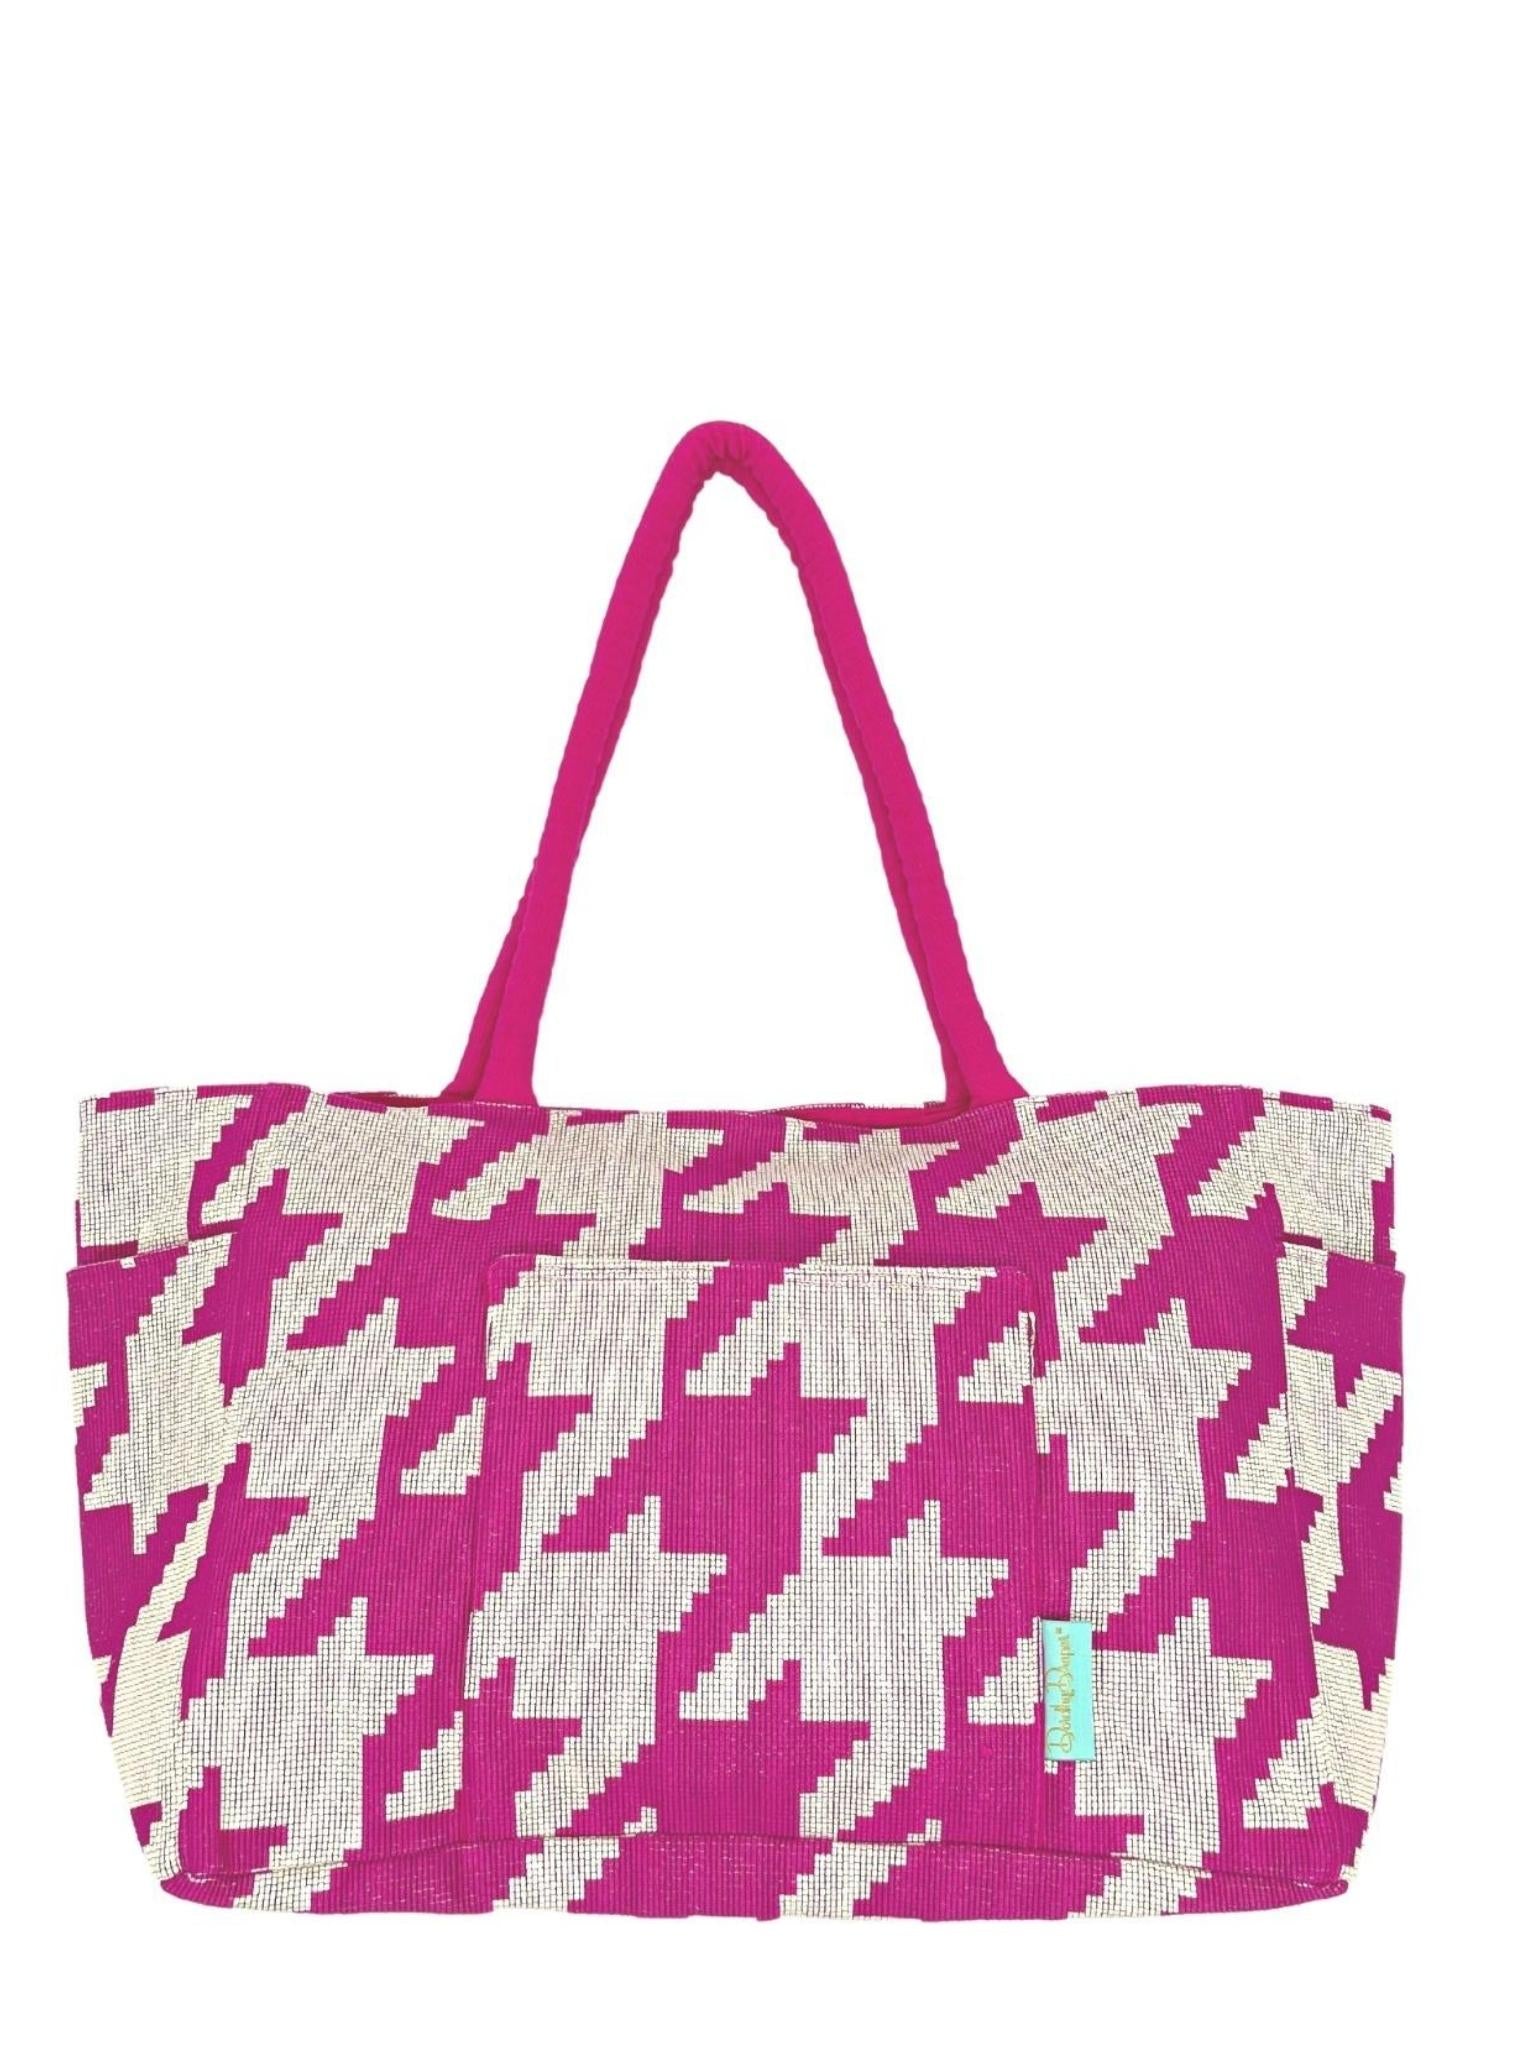 Boulevard Tote in Pink Houndstooth